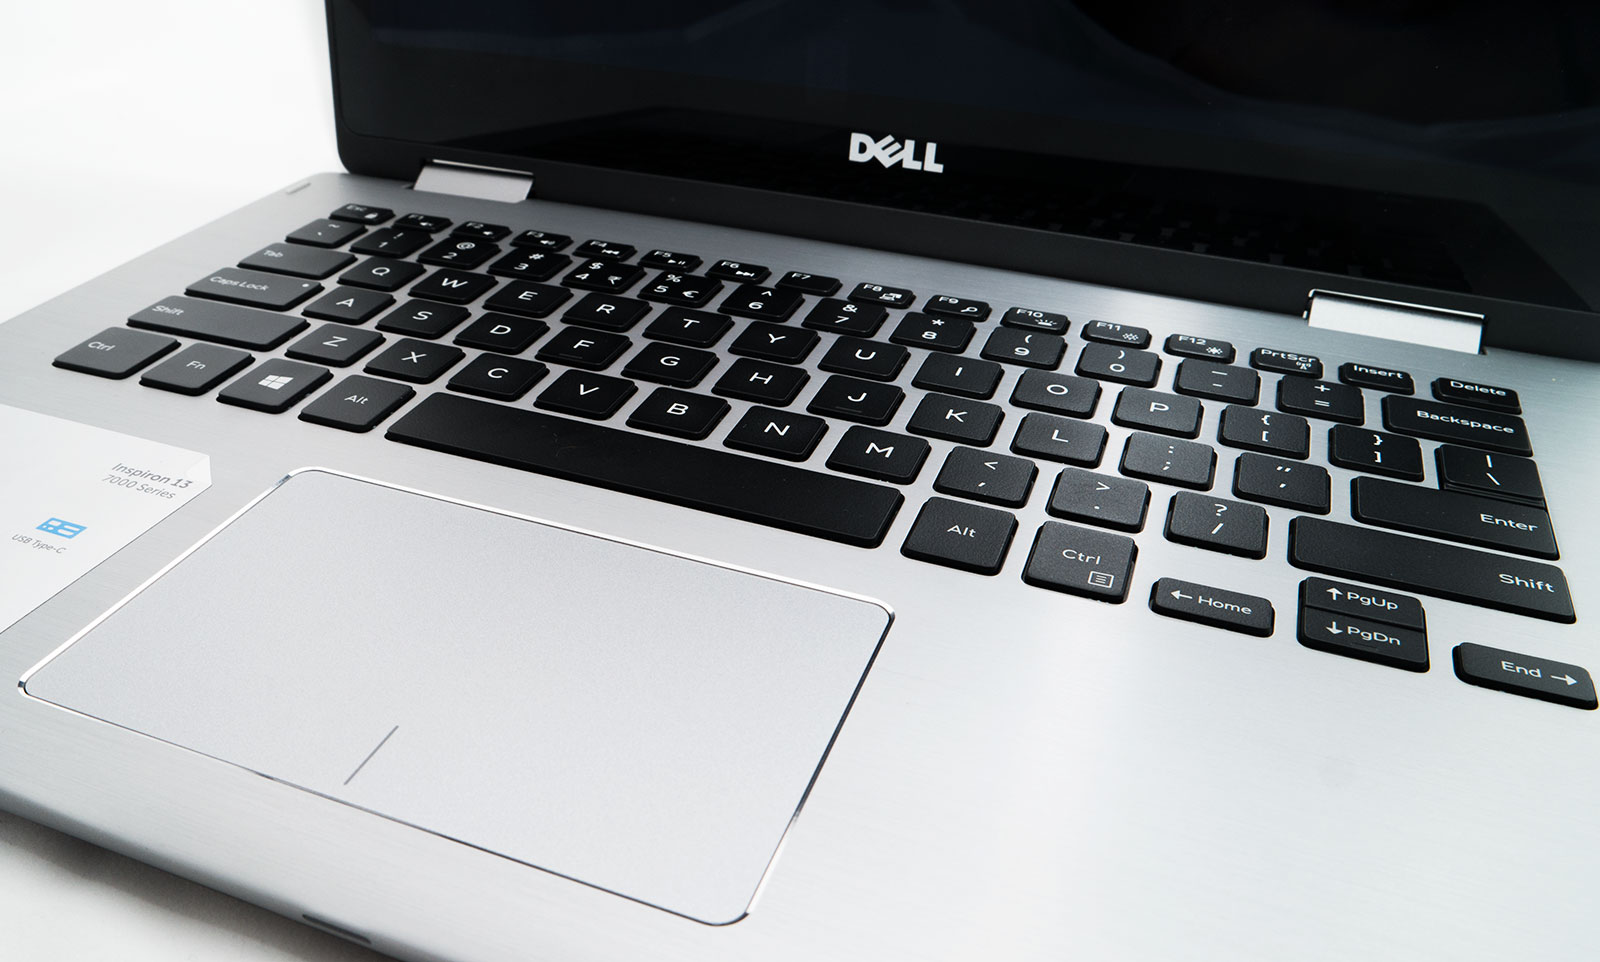 Review: Dell Inspiron 13 7000 2-in-1 (2016) – Pickr